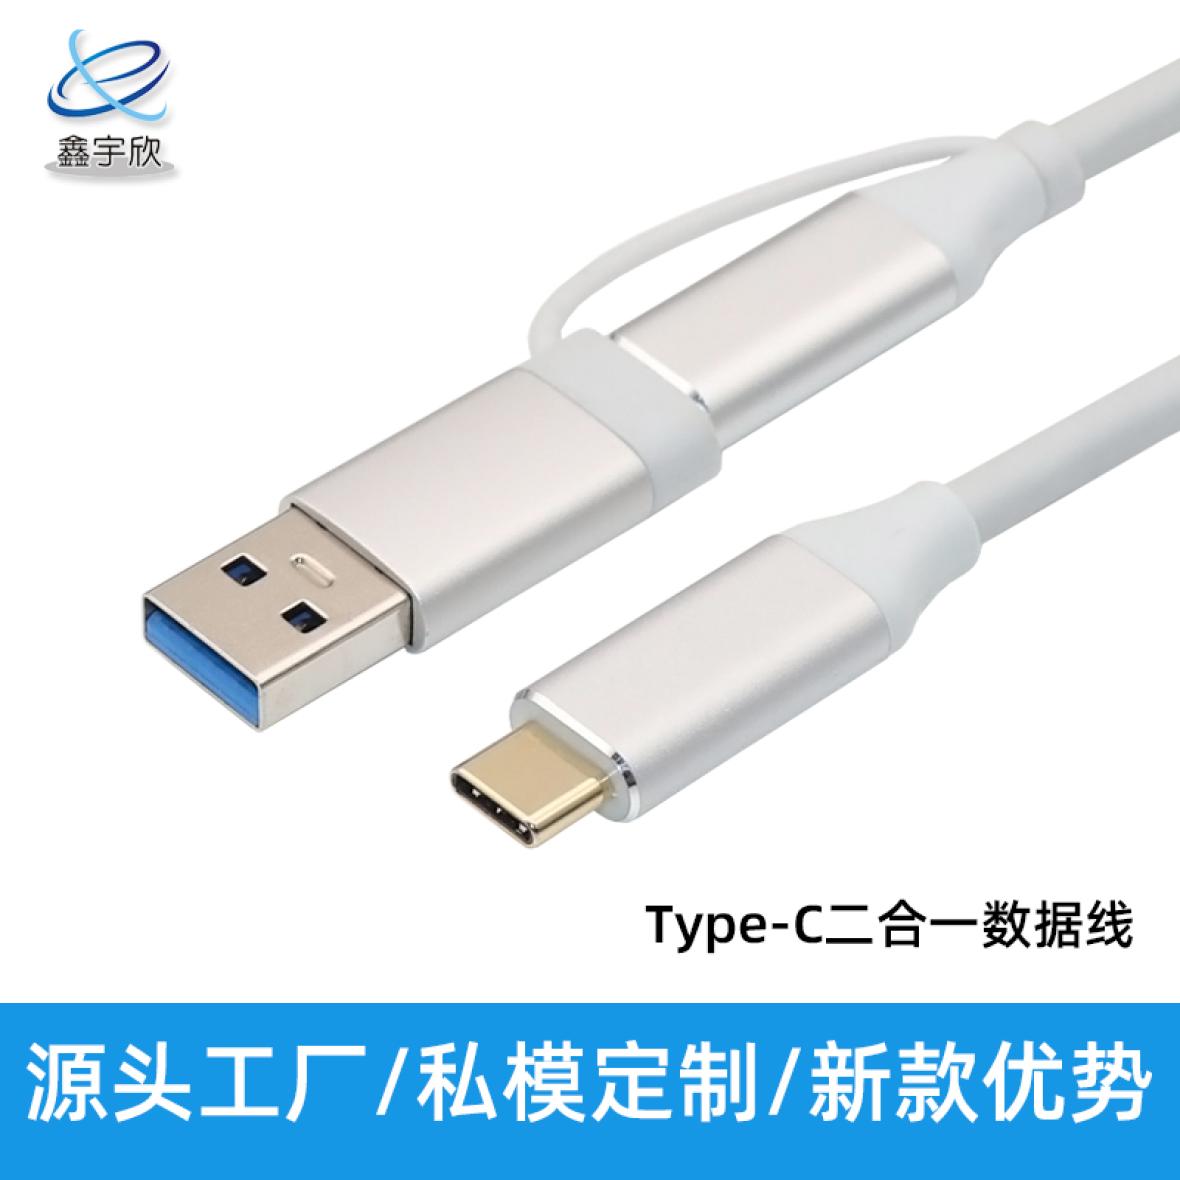  USB3.1 Type-C fast charging data cable 3.0 adapter two-in-one aluminum alloy shell 10G/5G